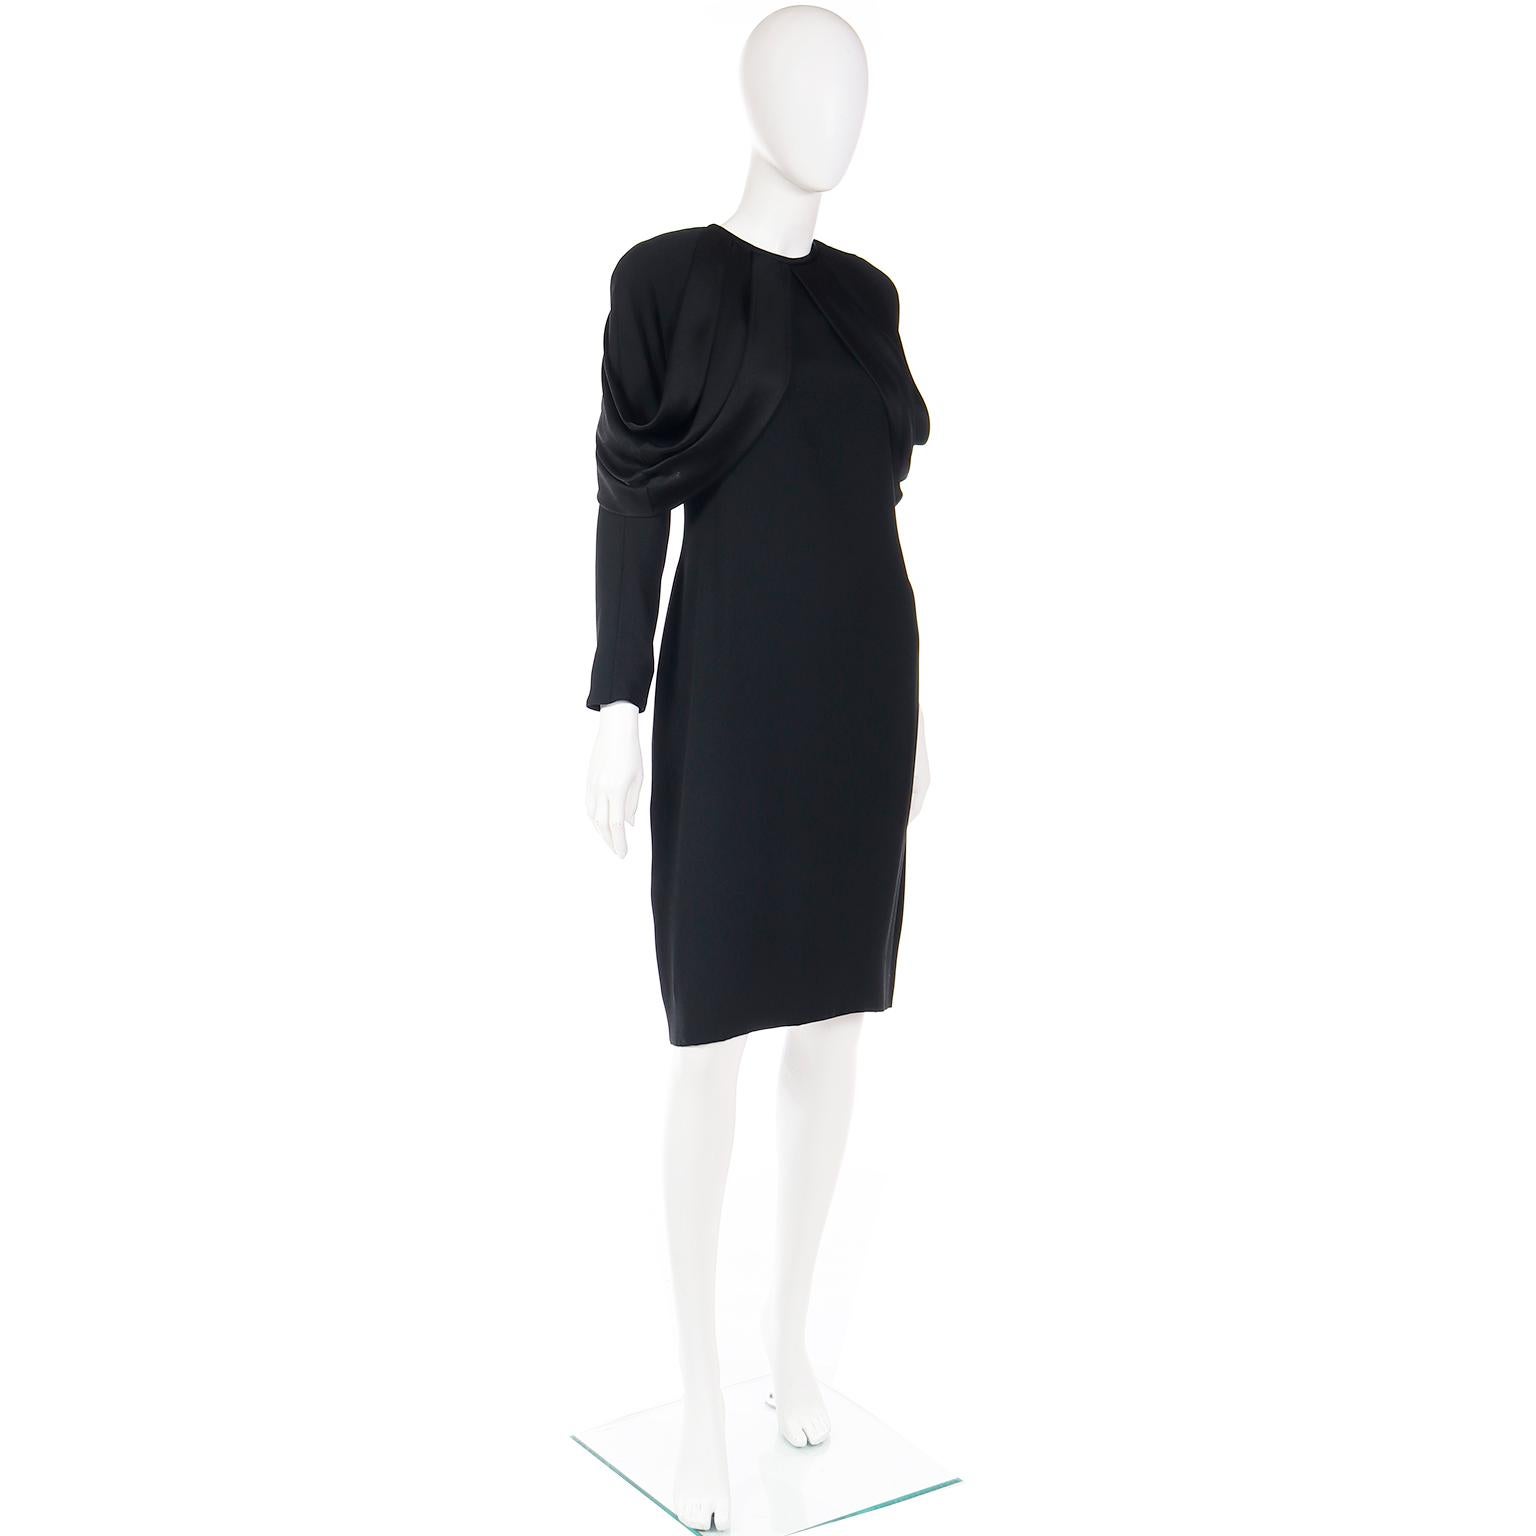 Adele Simpson Vintage Black Crepe Dress With Dramatic Satin Drape In Excellent Condition For Sale In Portland, OR